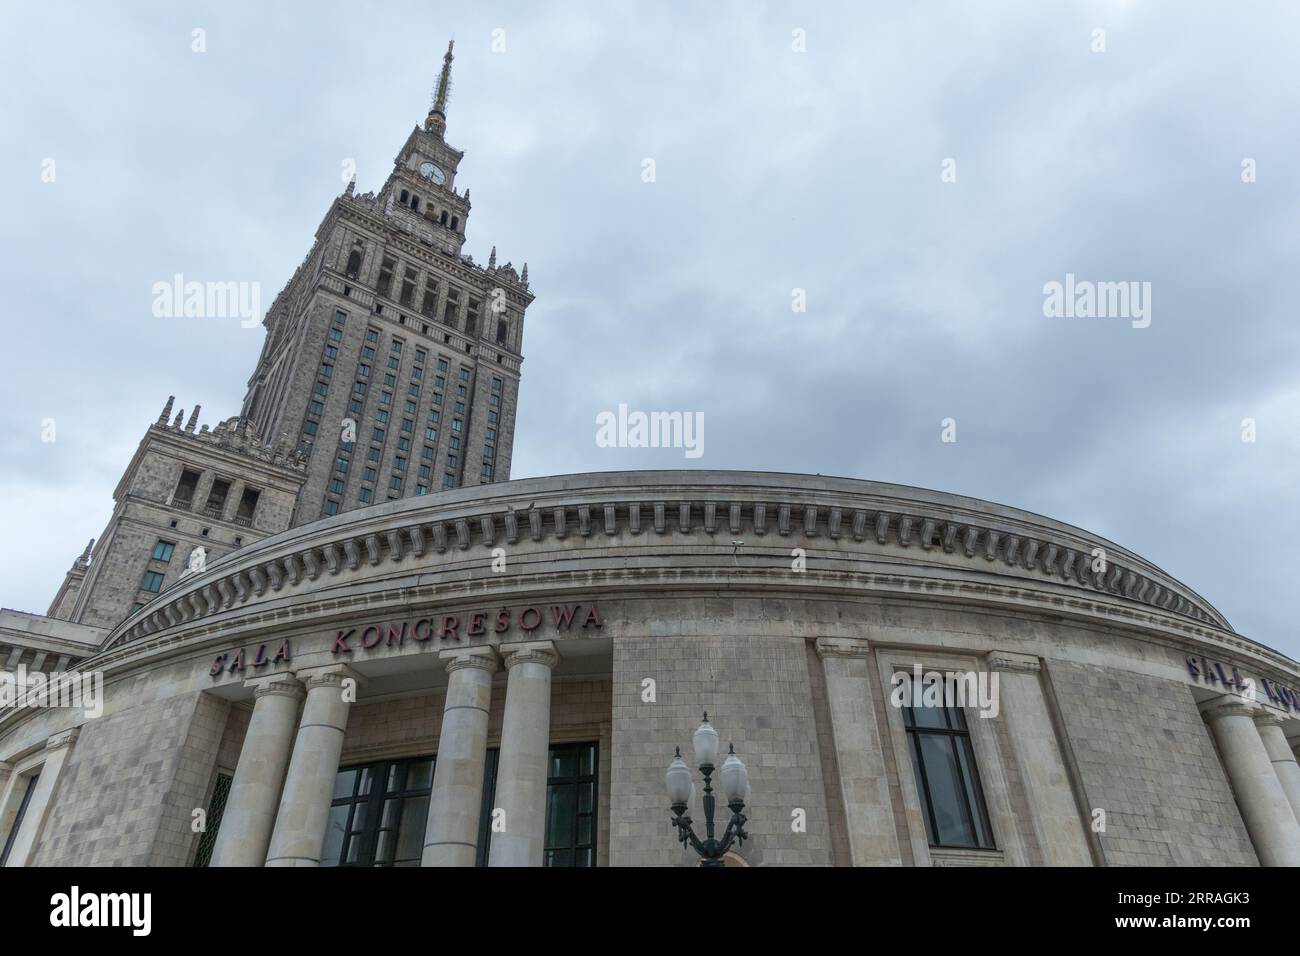 A view of the Pałac Kultury i Nauki (Palace of Culture and Science) in Warsaw, Poland Stock Photo